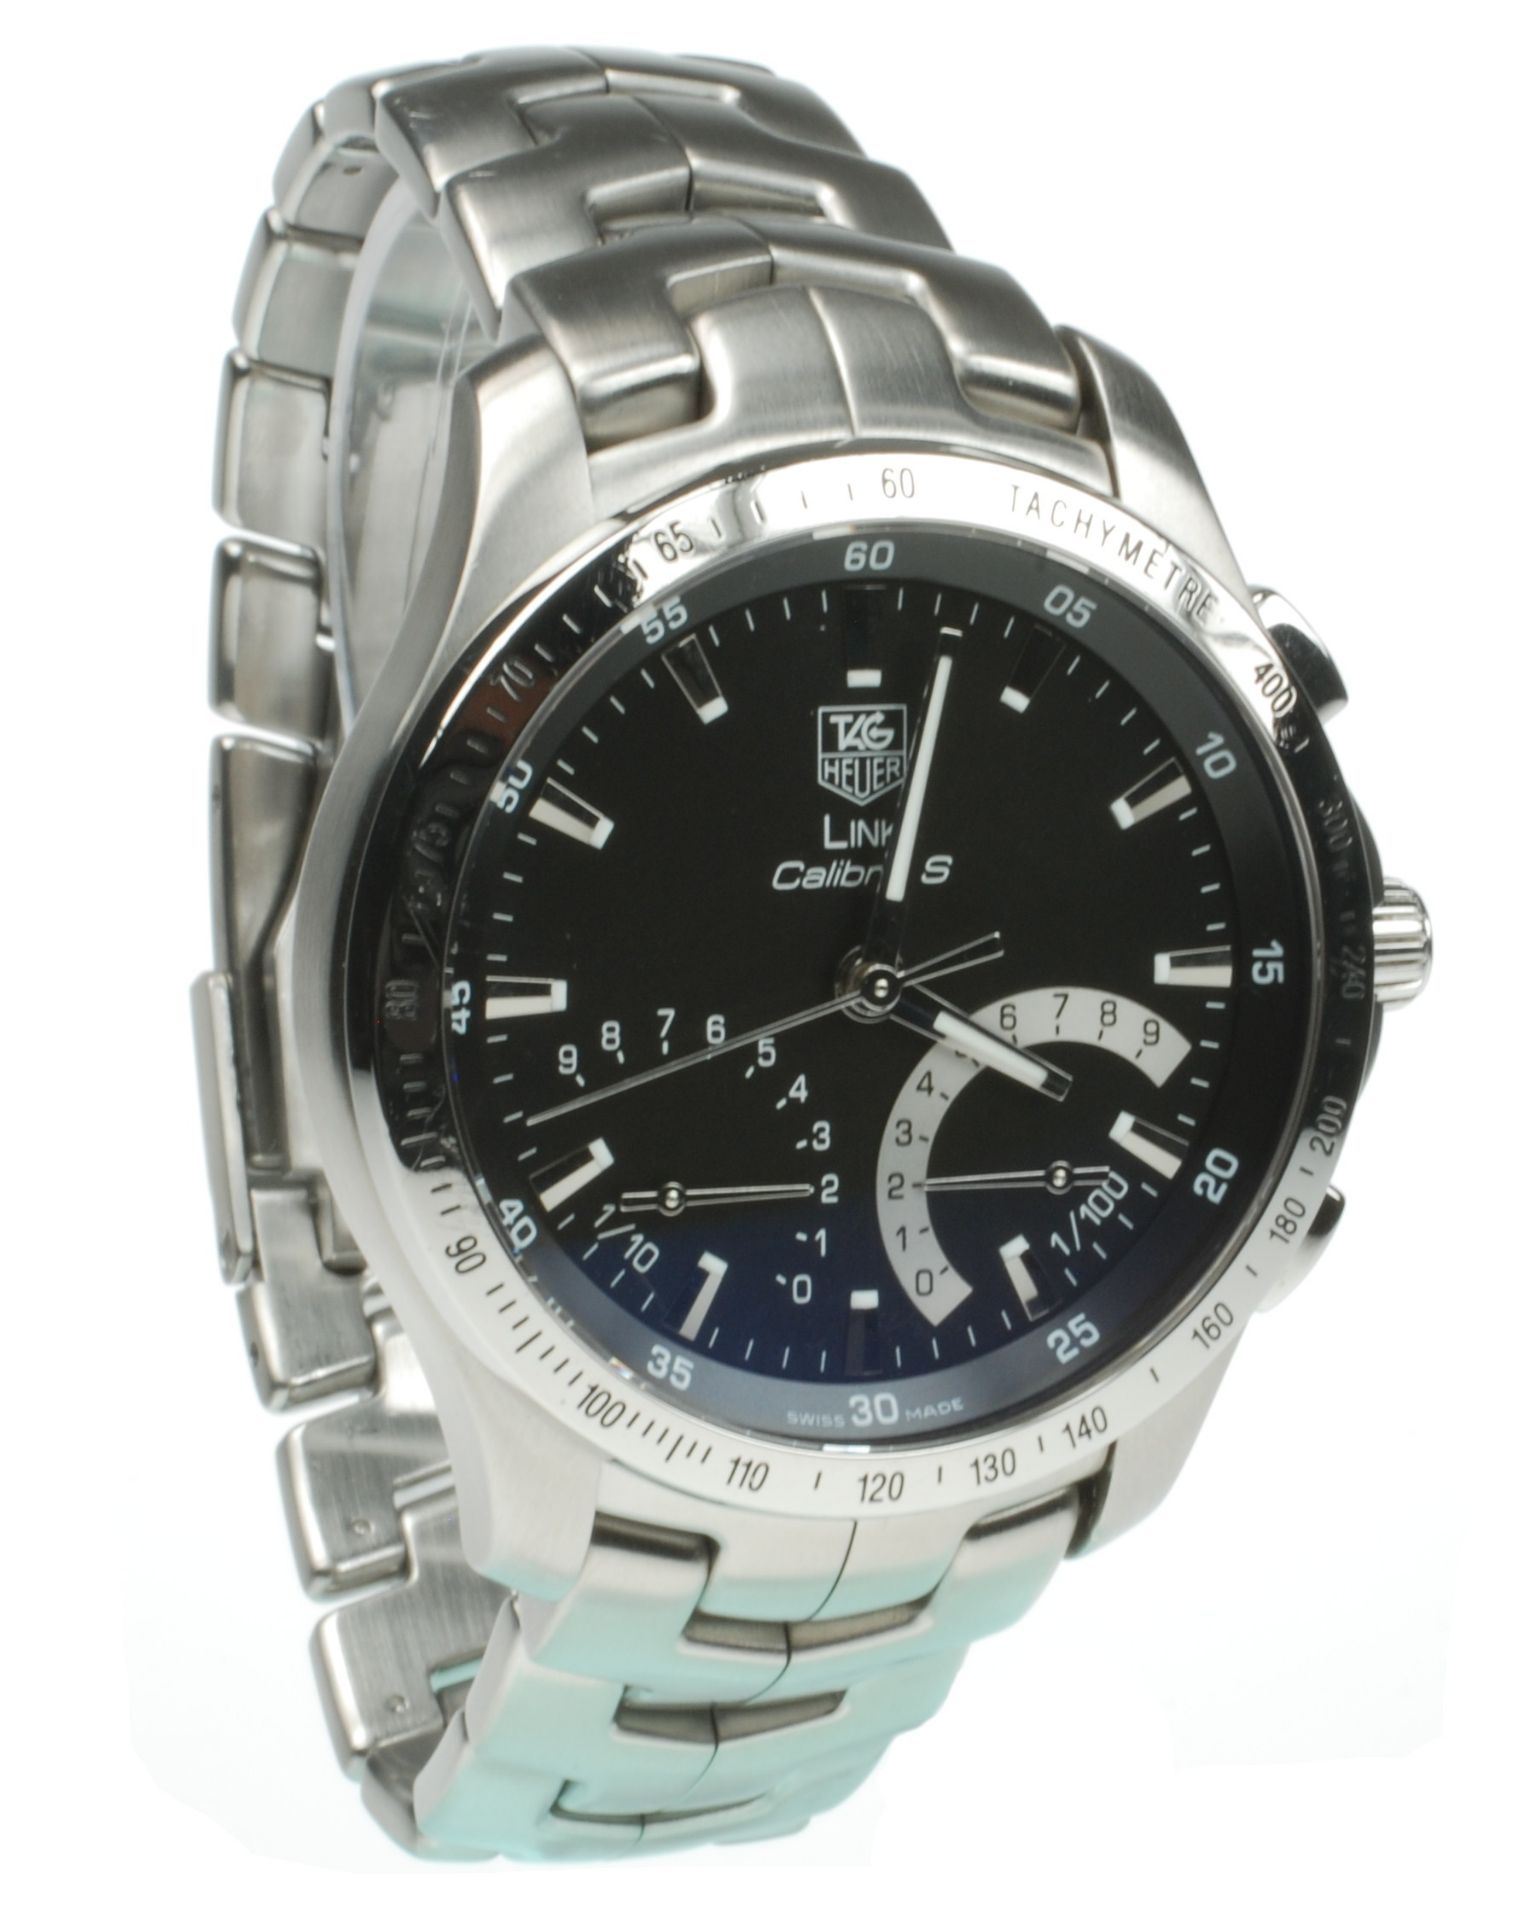 2008 Gents Tag Heuer Calibre S Link | Stainless Steel | CJF7110| WR997